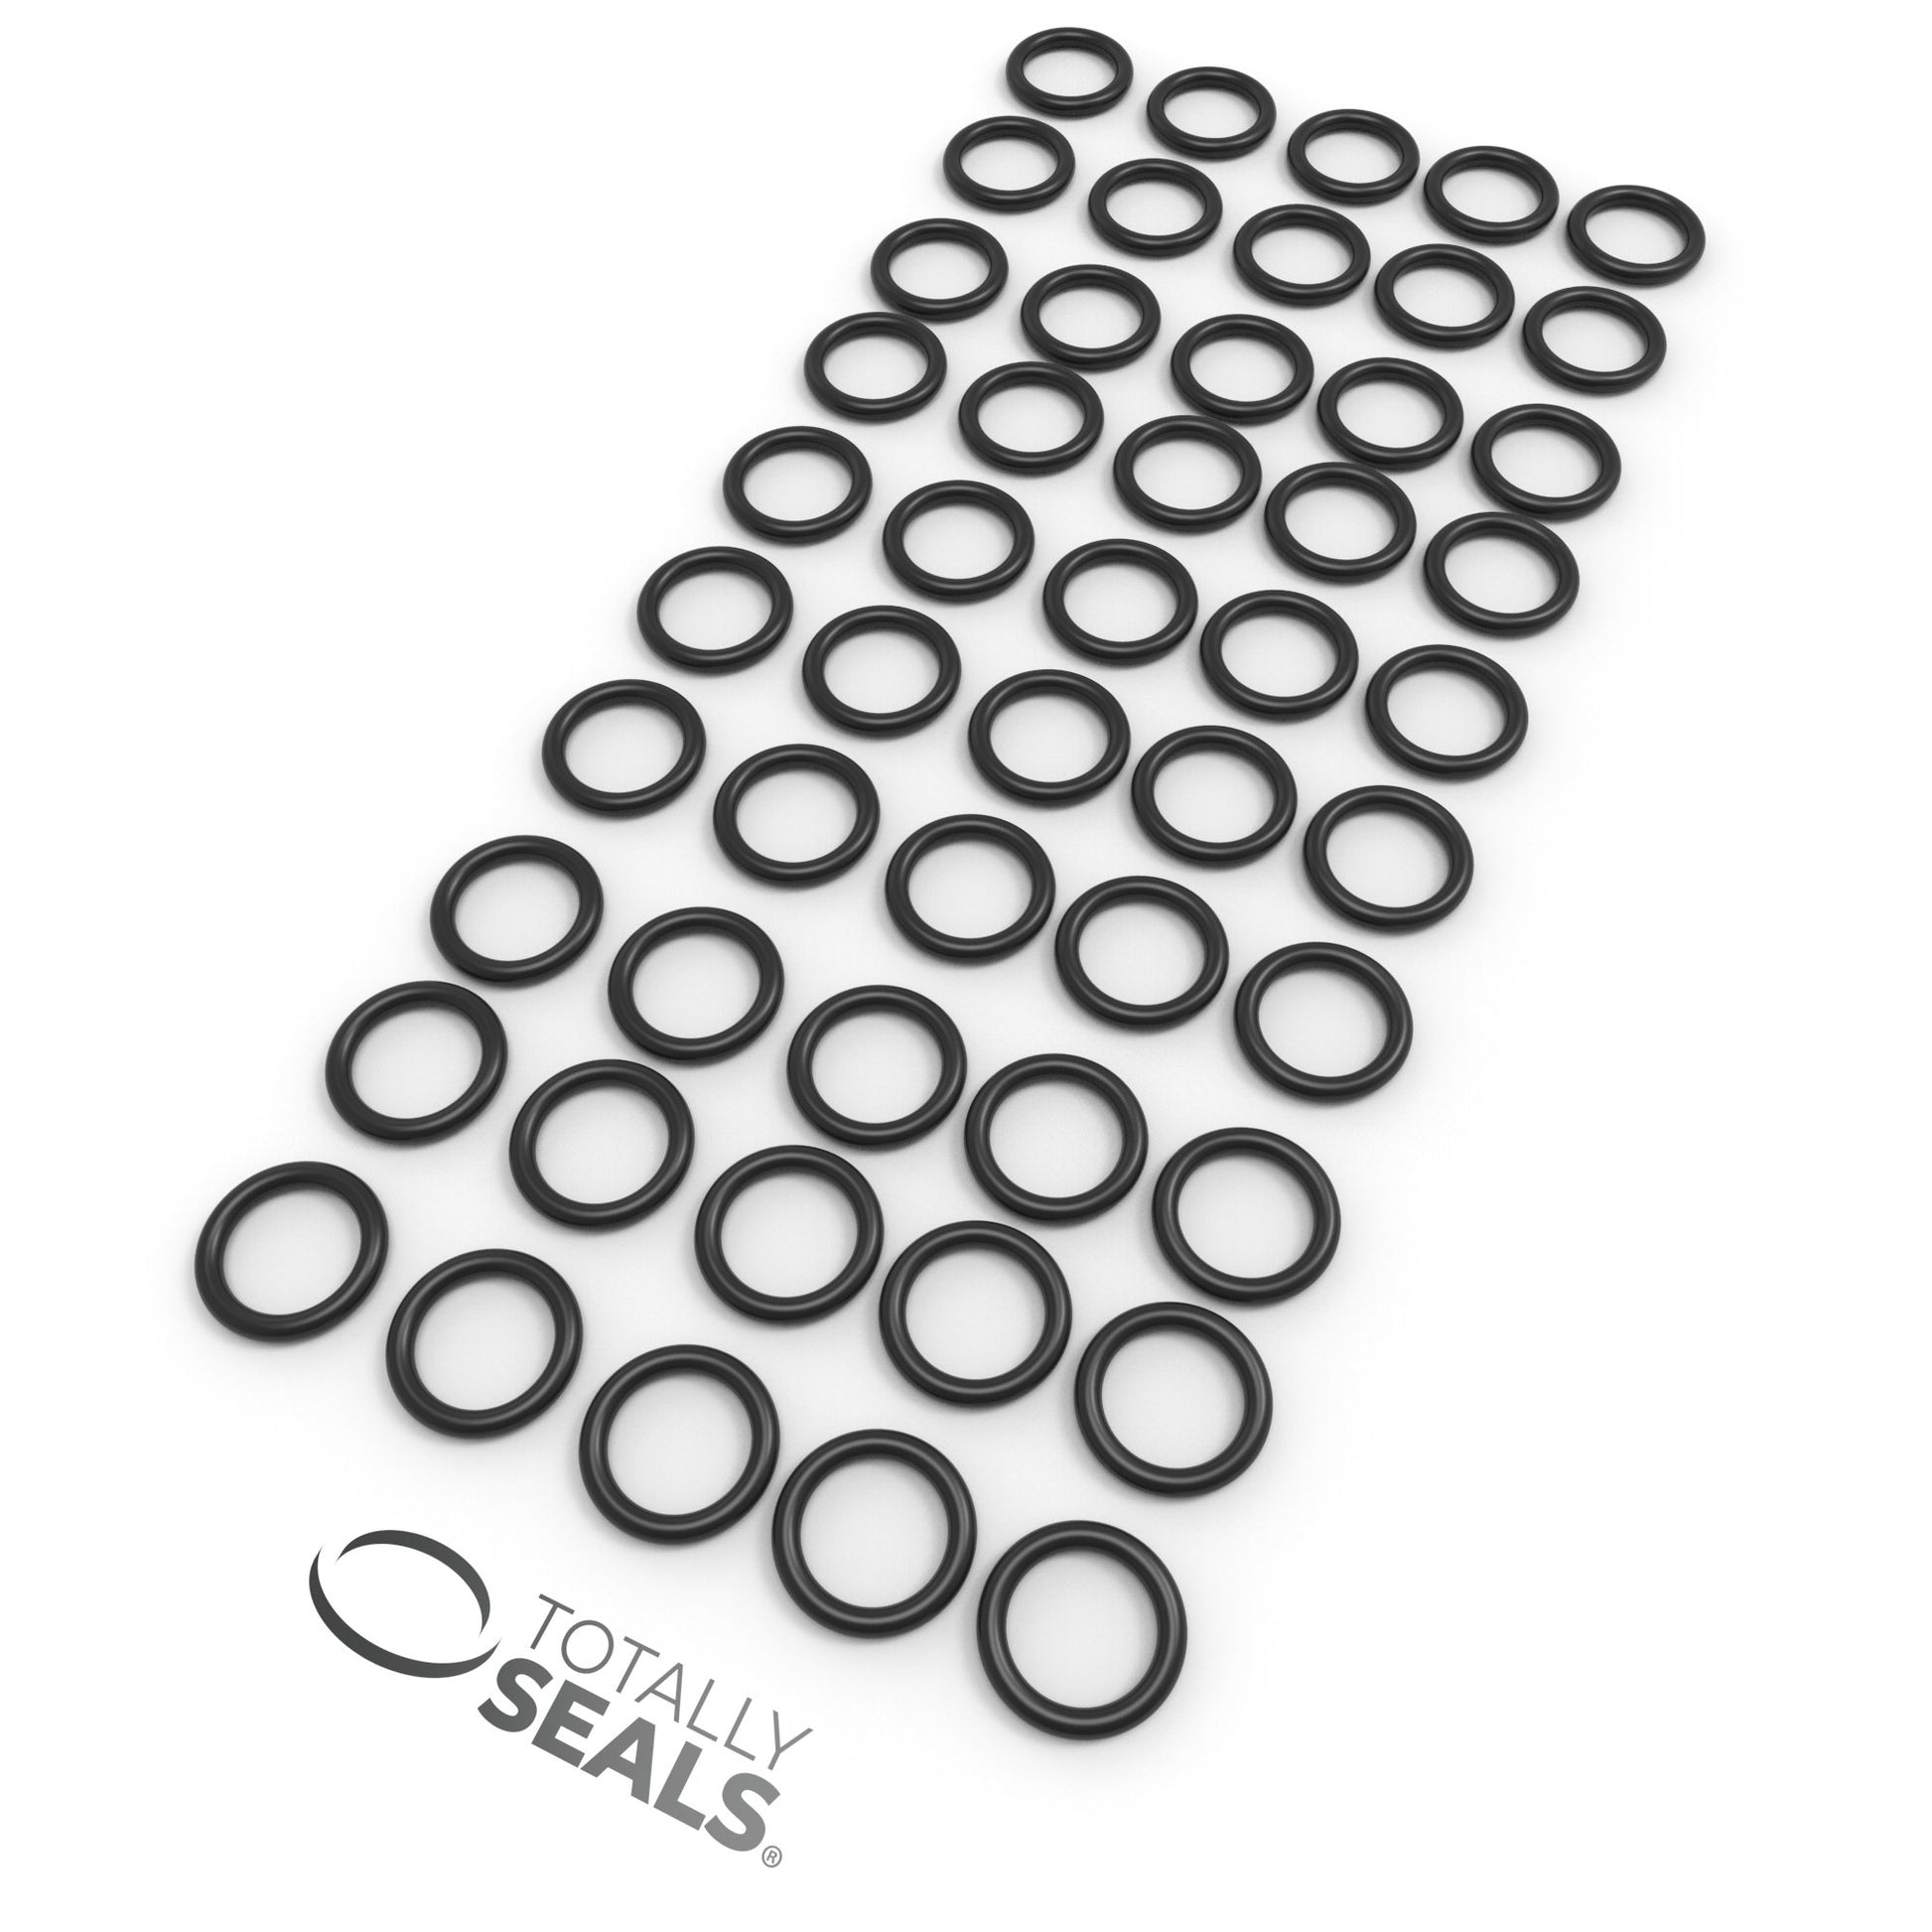 3/4" x 3/32" (BS116) Imperial Nitrile O-Rings - Totally Seals®